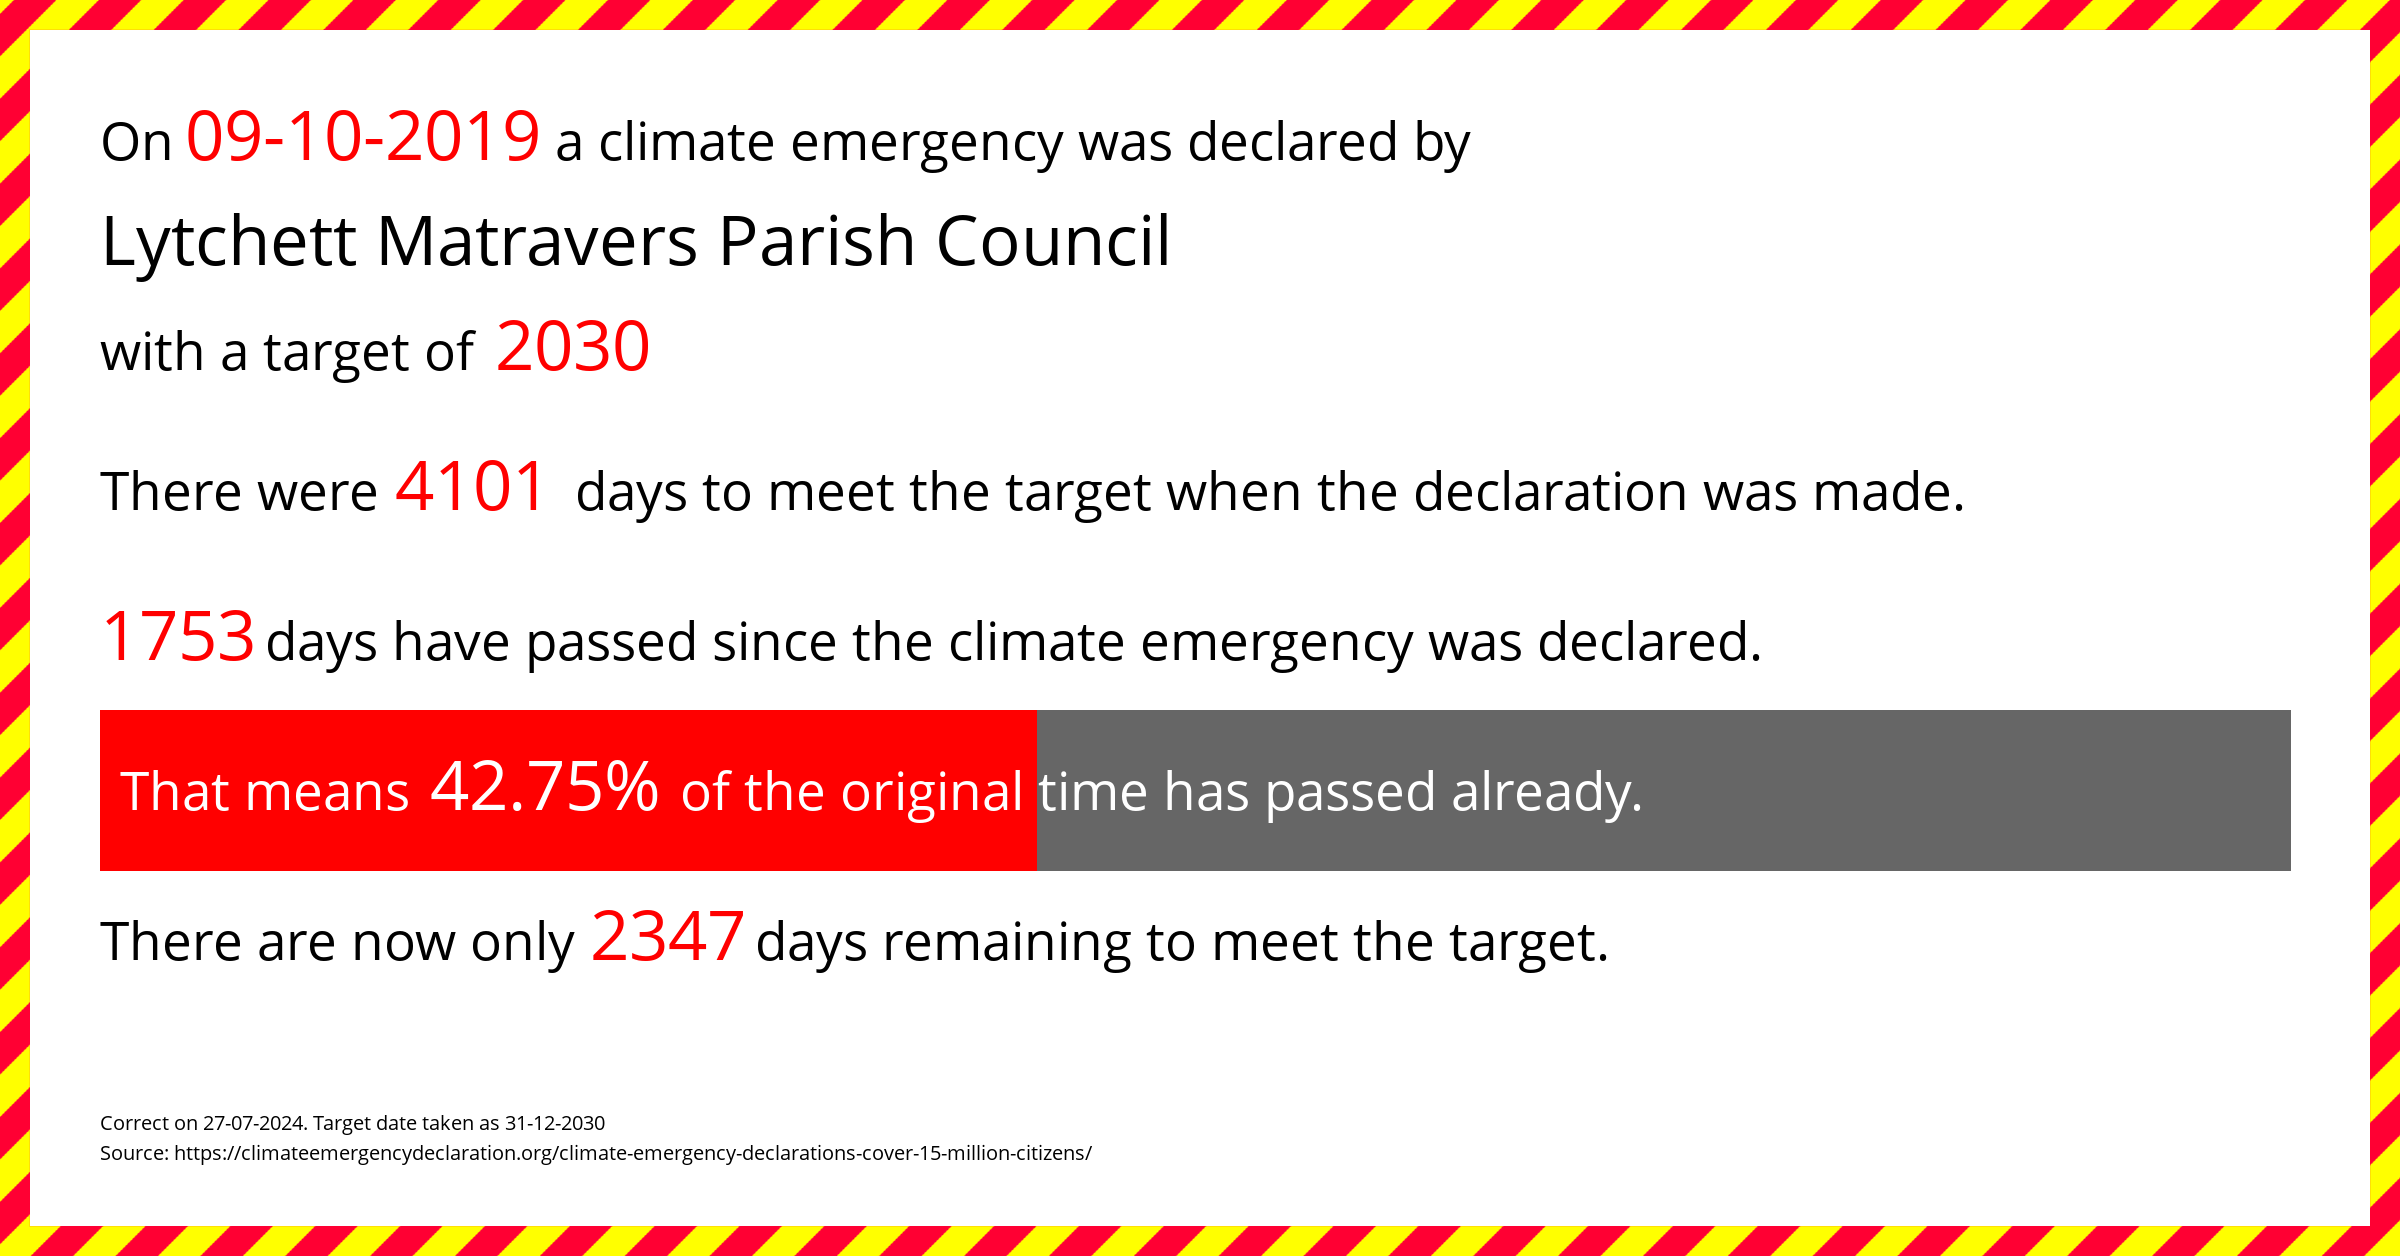 Lytchett Matravers Parish Council declared a Climate emergency on Wednesday 9th October 2019, with a target of 2030.